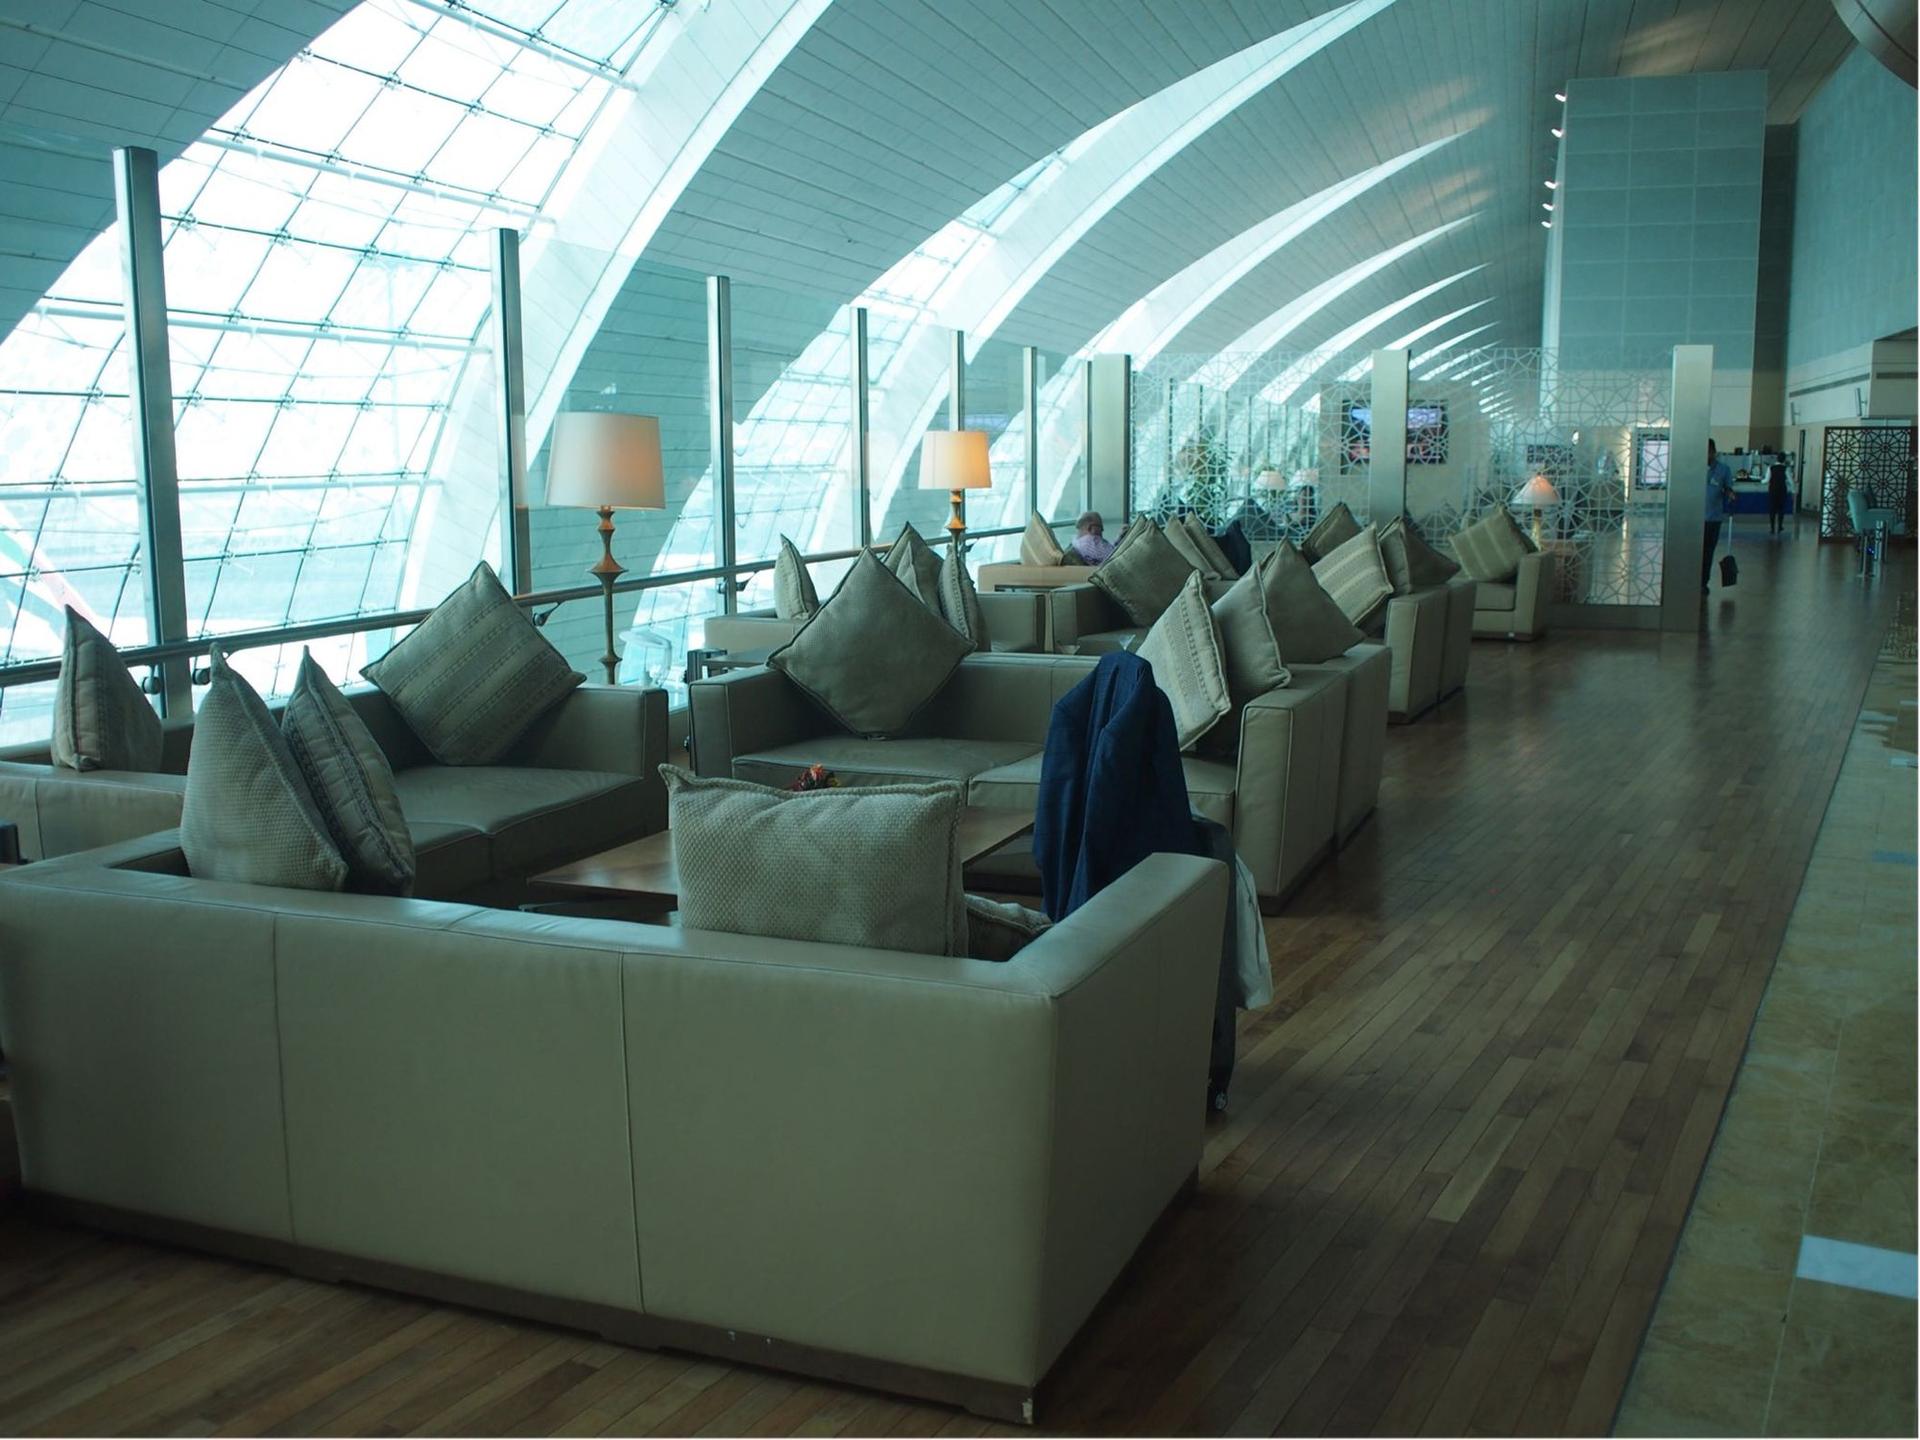 Emirates First Class Lounge image 21 of 25